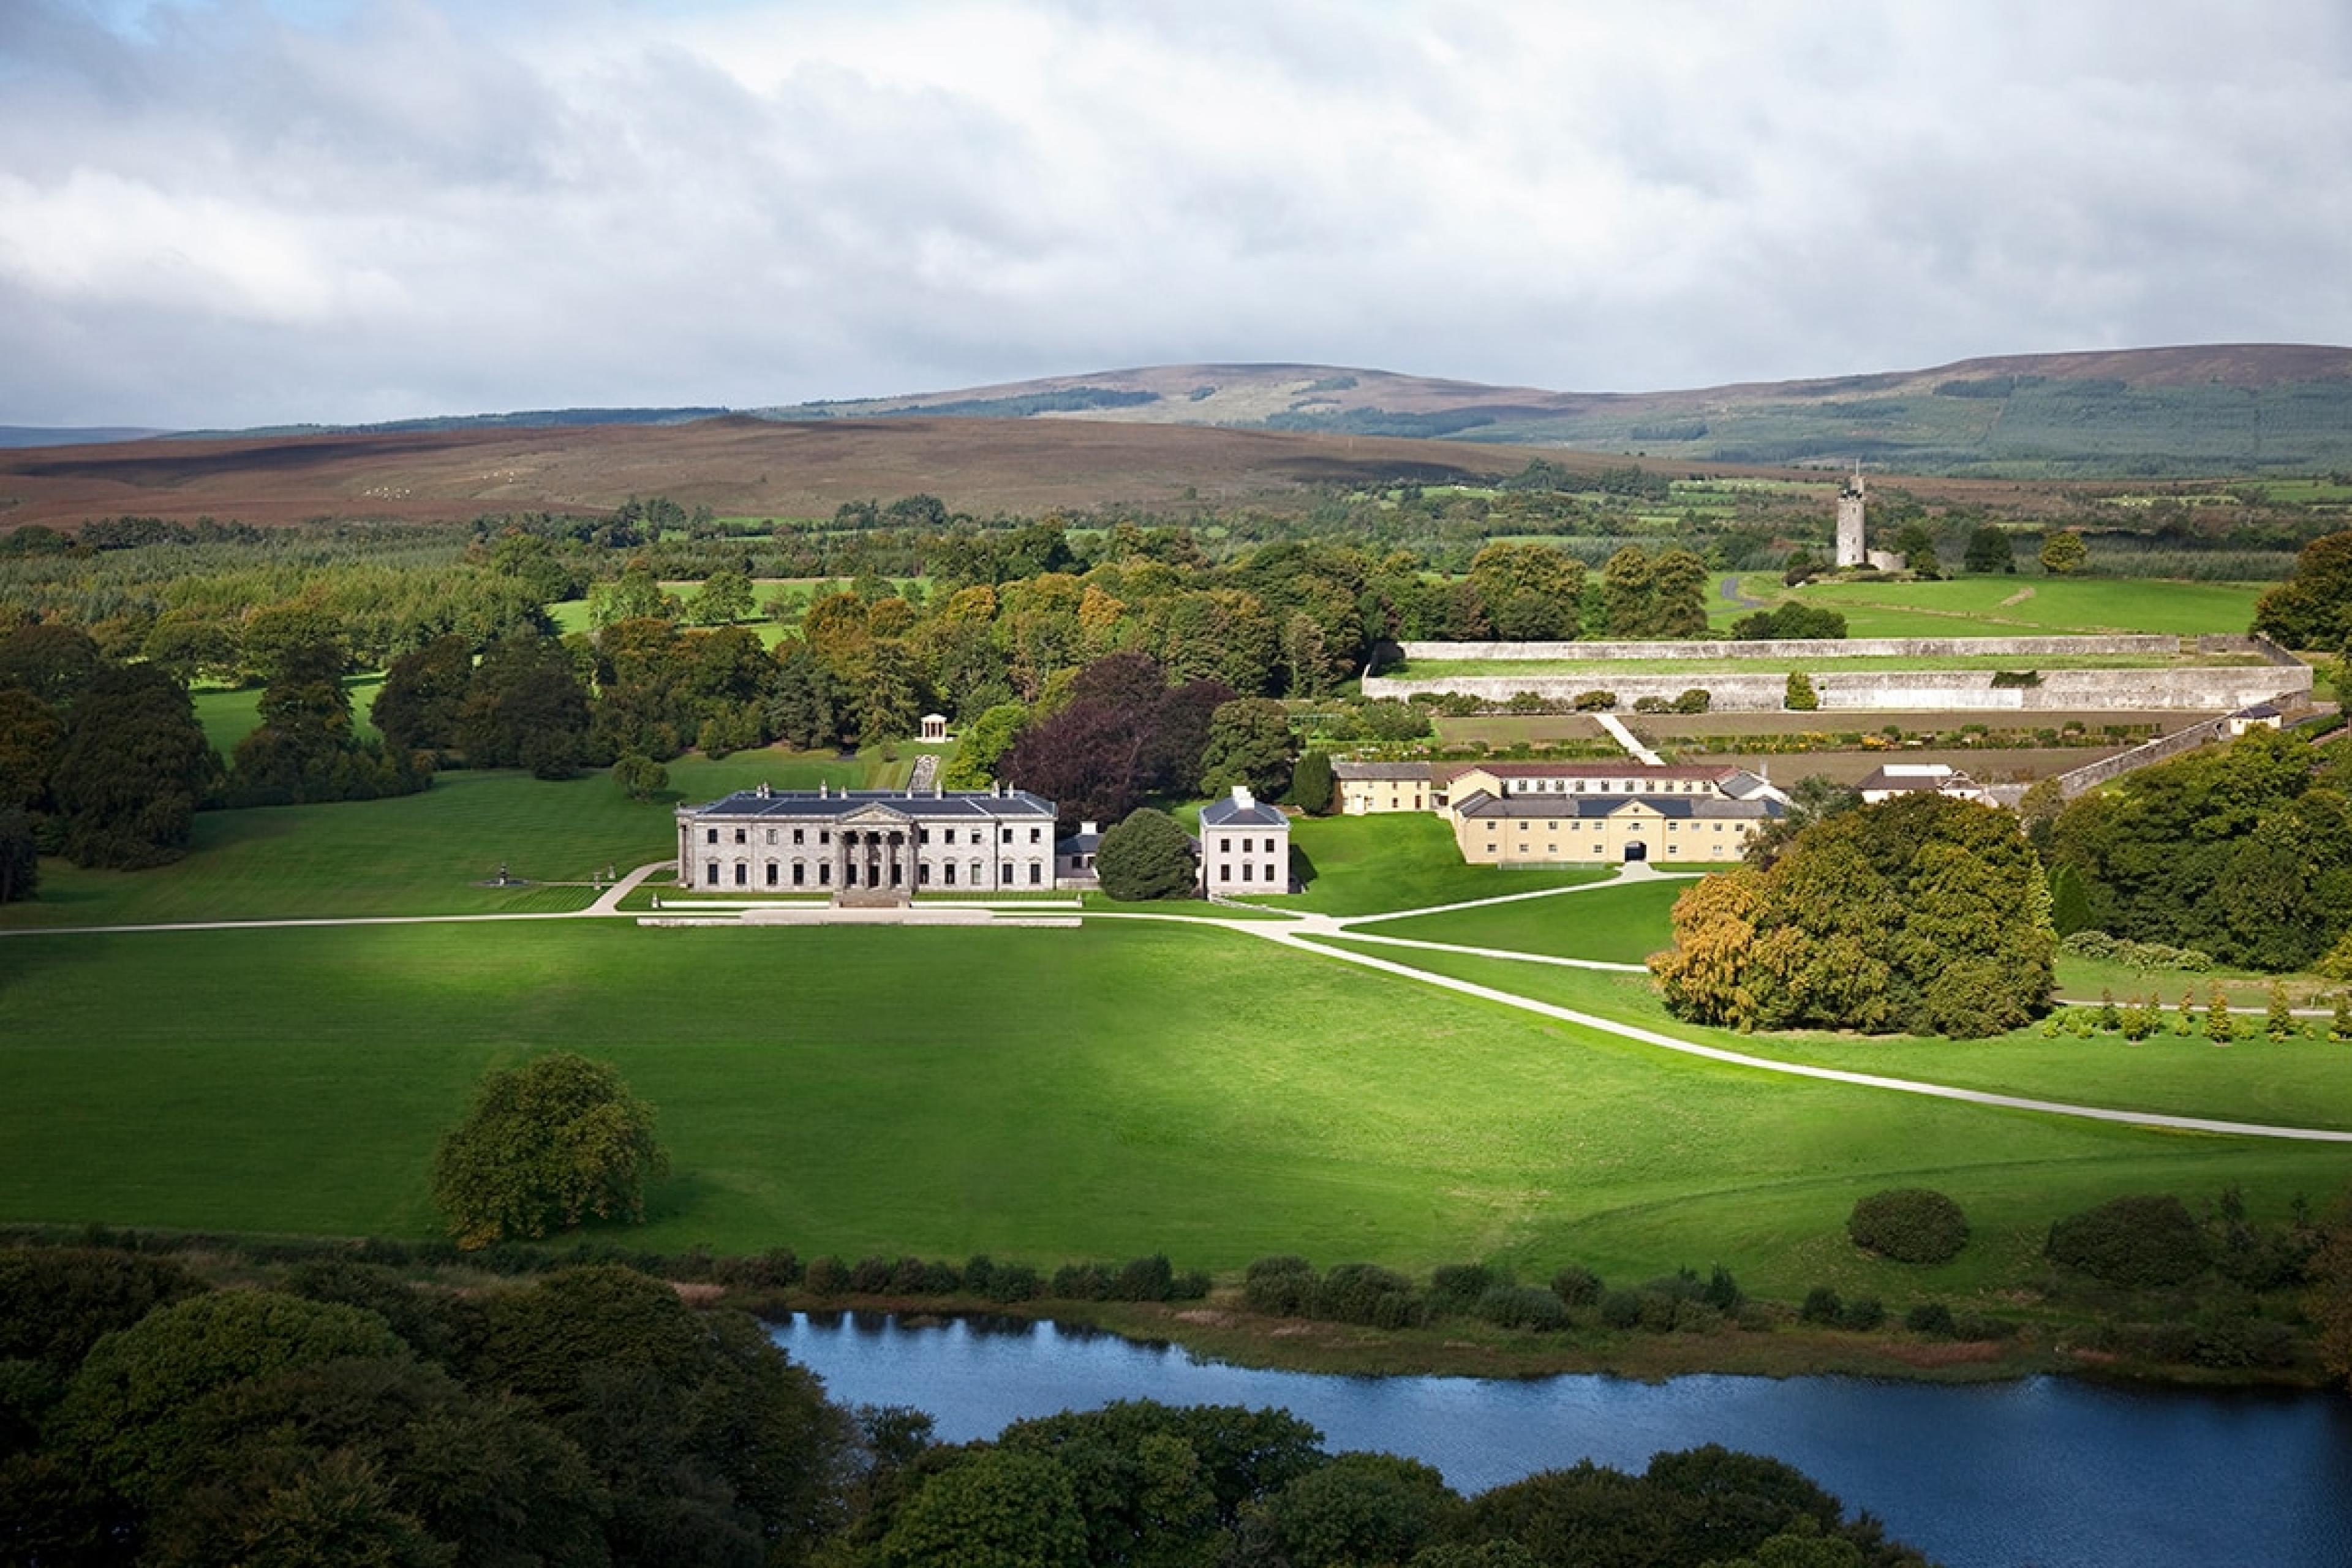 aerial view of grand irish estate hotel with palace-like main building set back from a pond